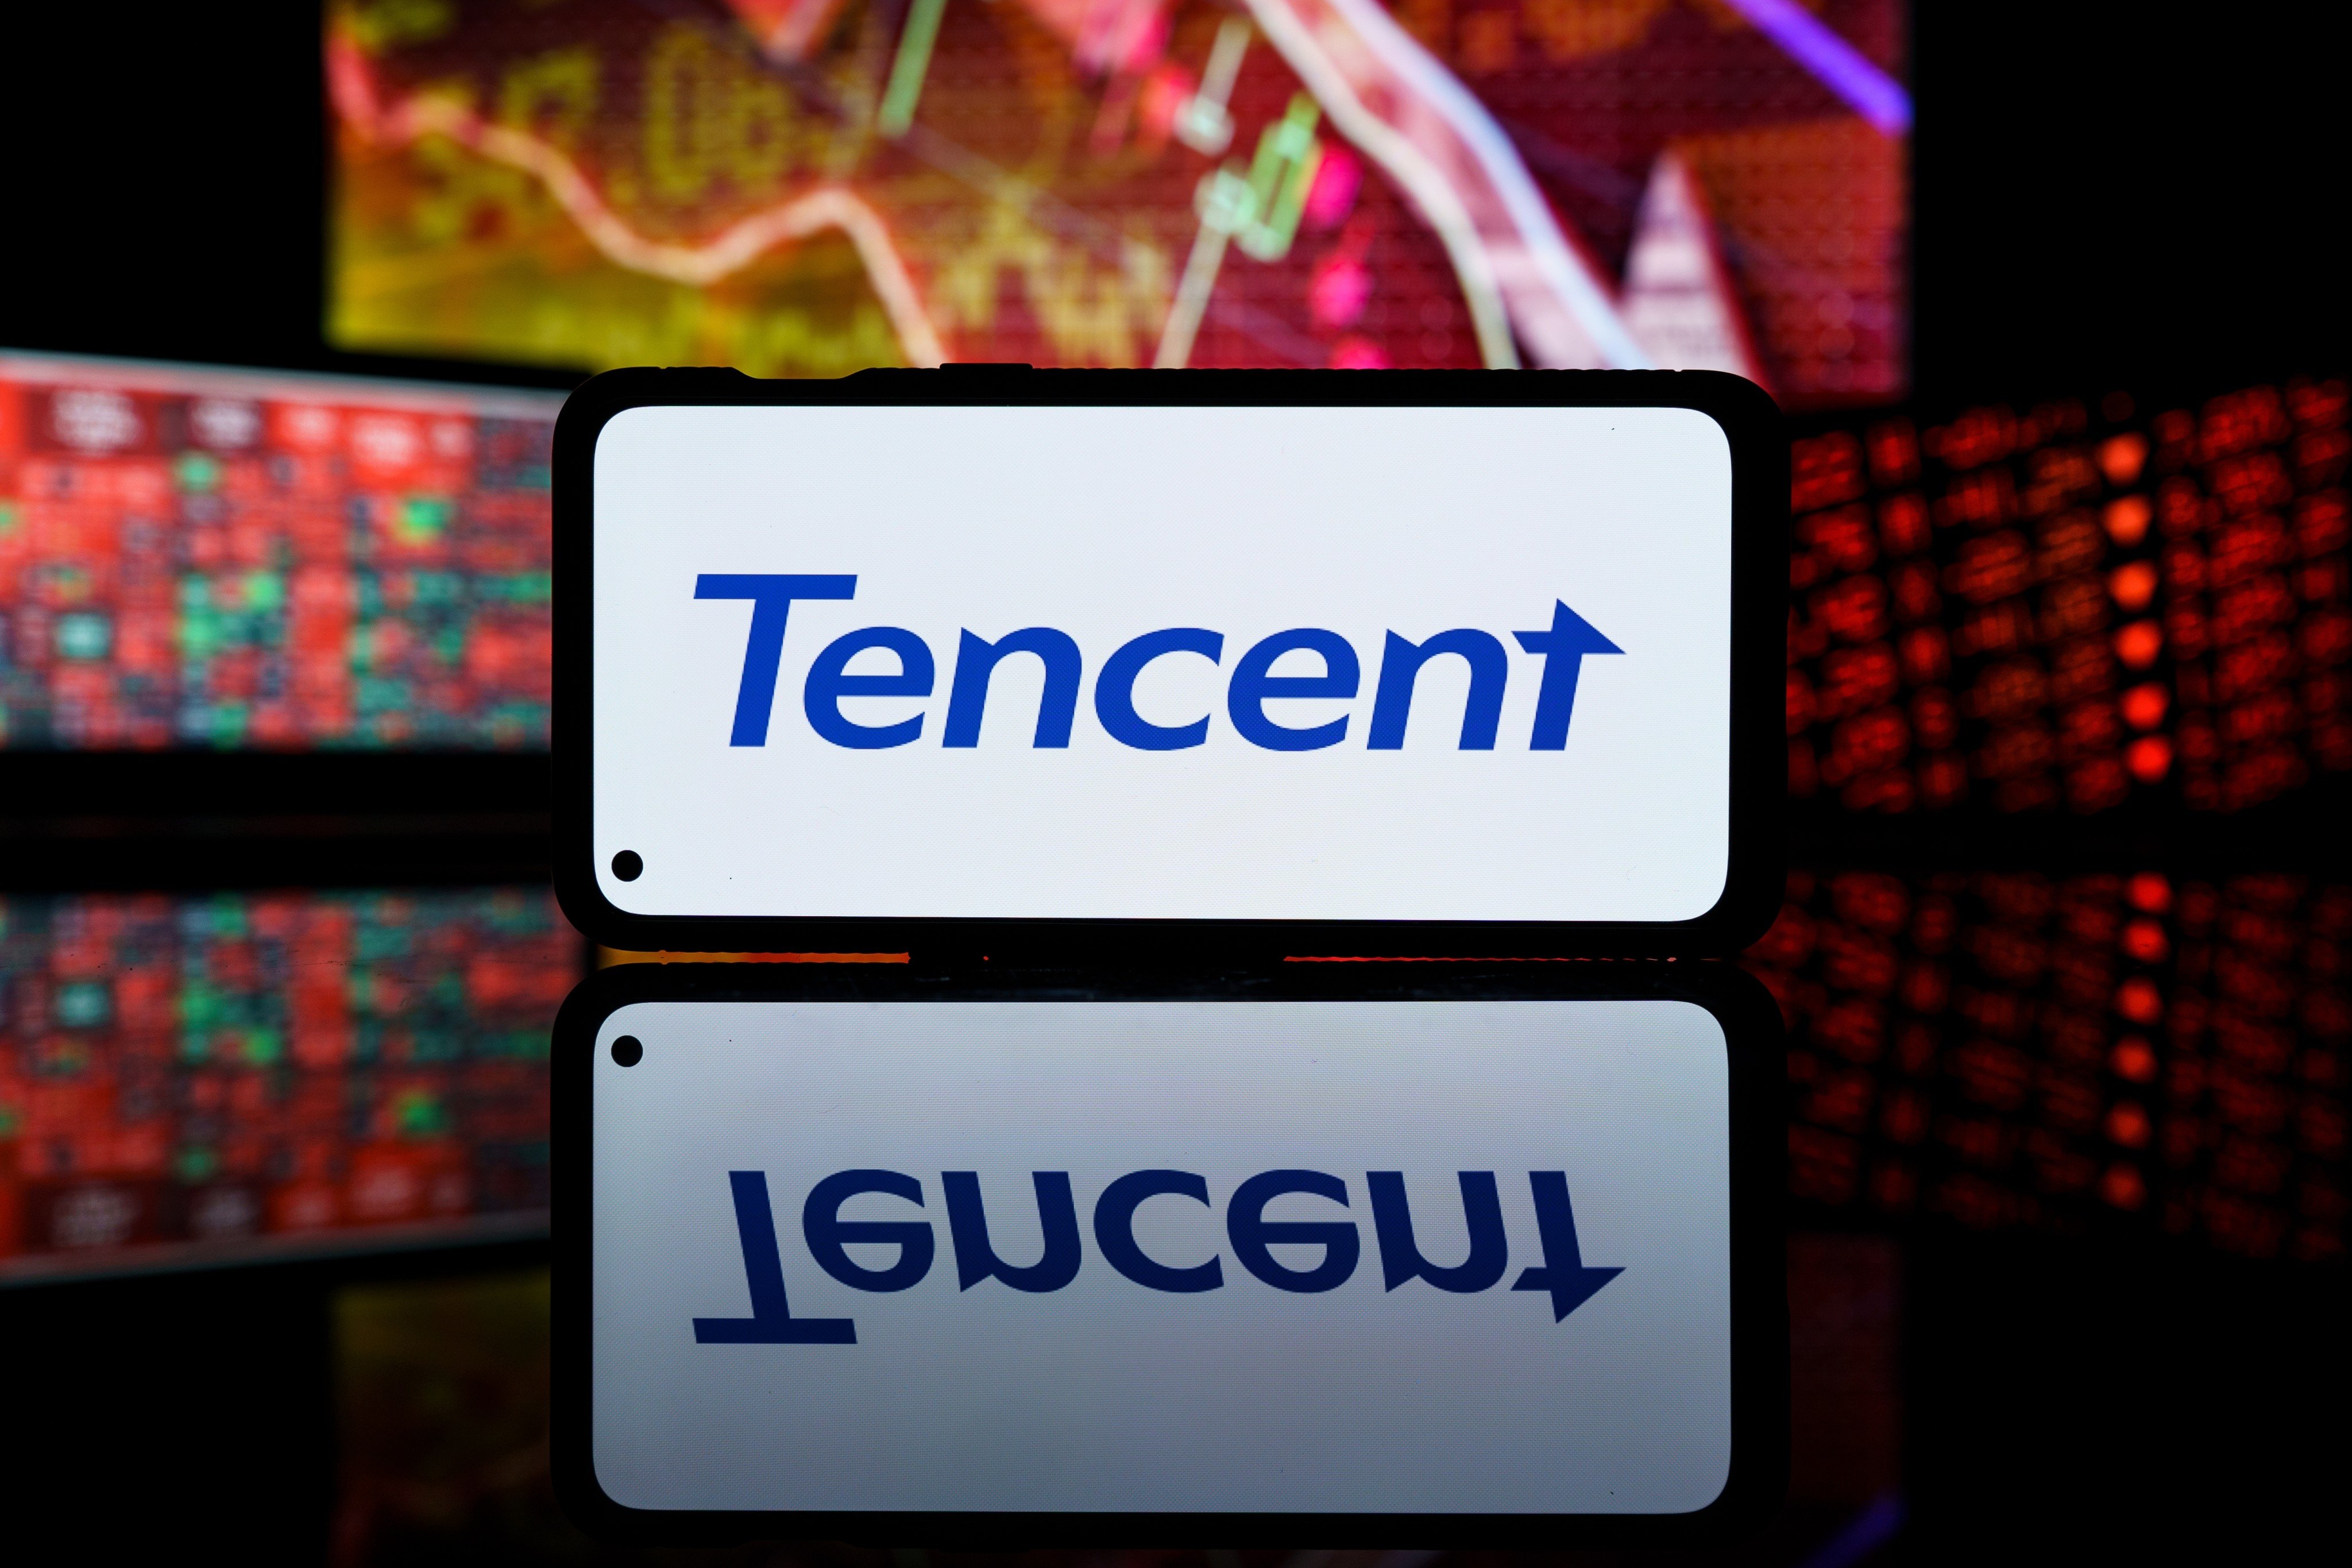 Tencent Holdings has one of the largest inventories of artificial intelligence chips in China, according to company president Martin Lau Chi-ping. Photo: Shutterstock